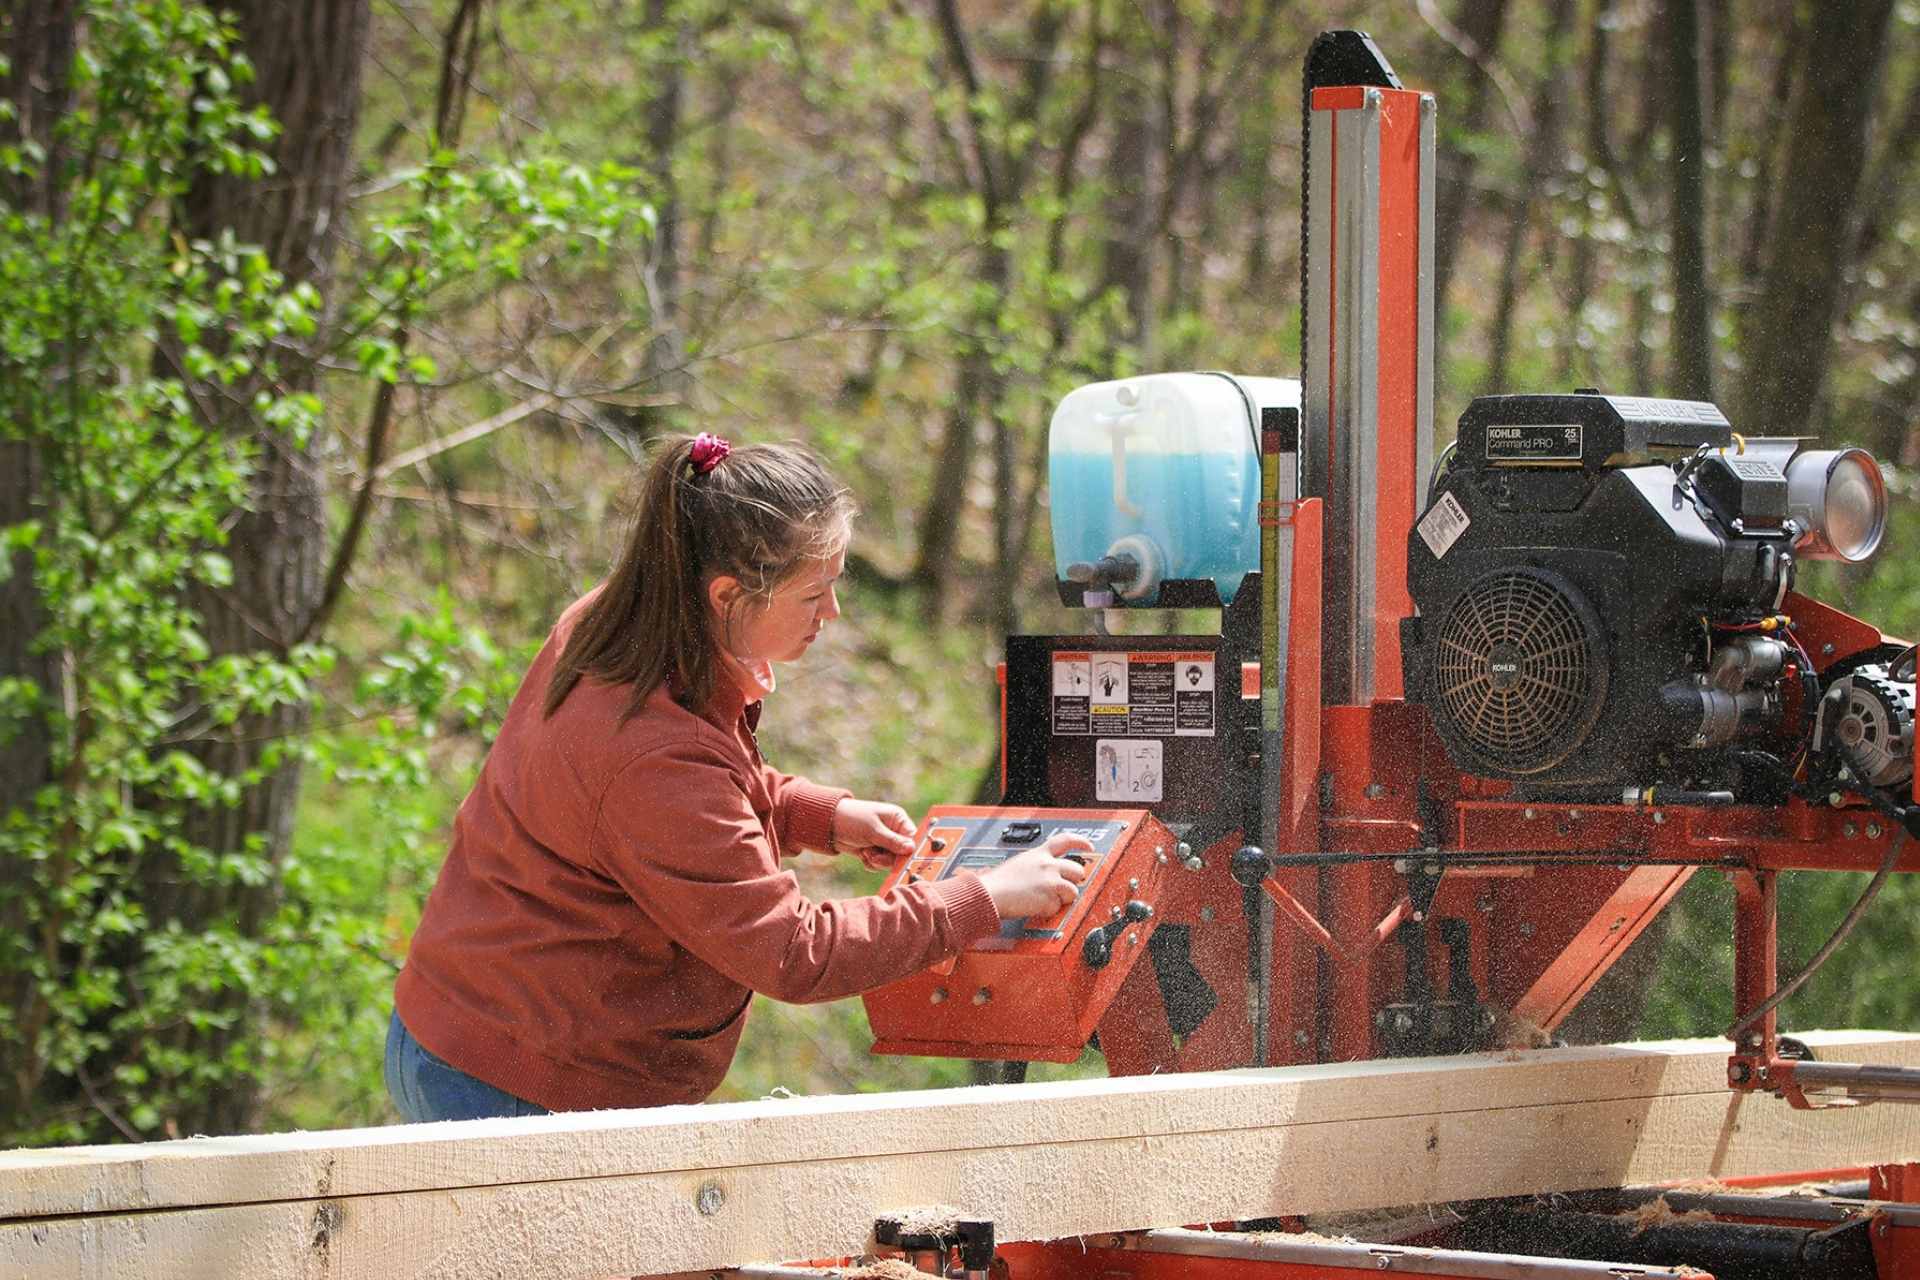 Glenville State College student Gabrielle Dean cuts a log down into boards using the College’s portable Wood-Mizer bandsaw.